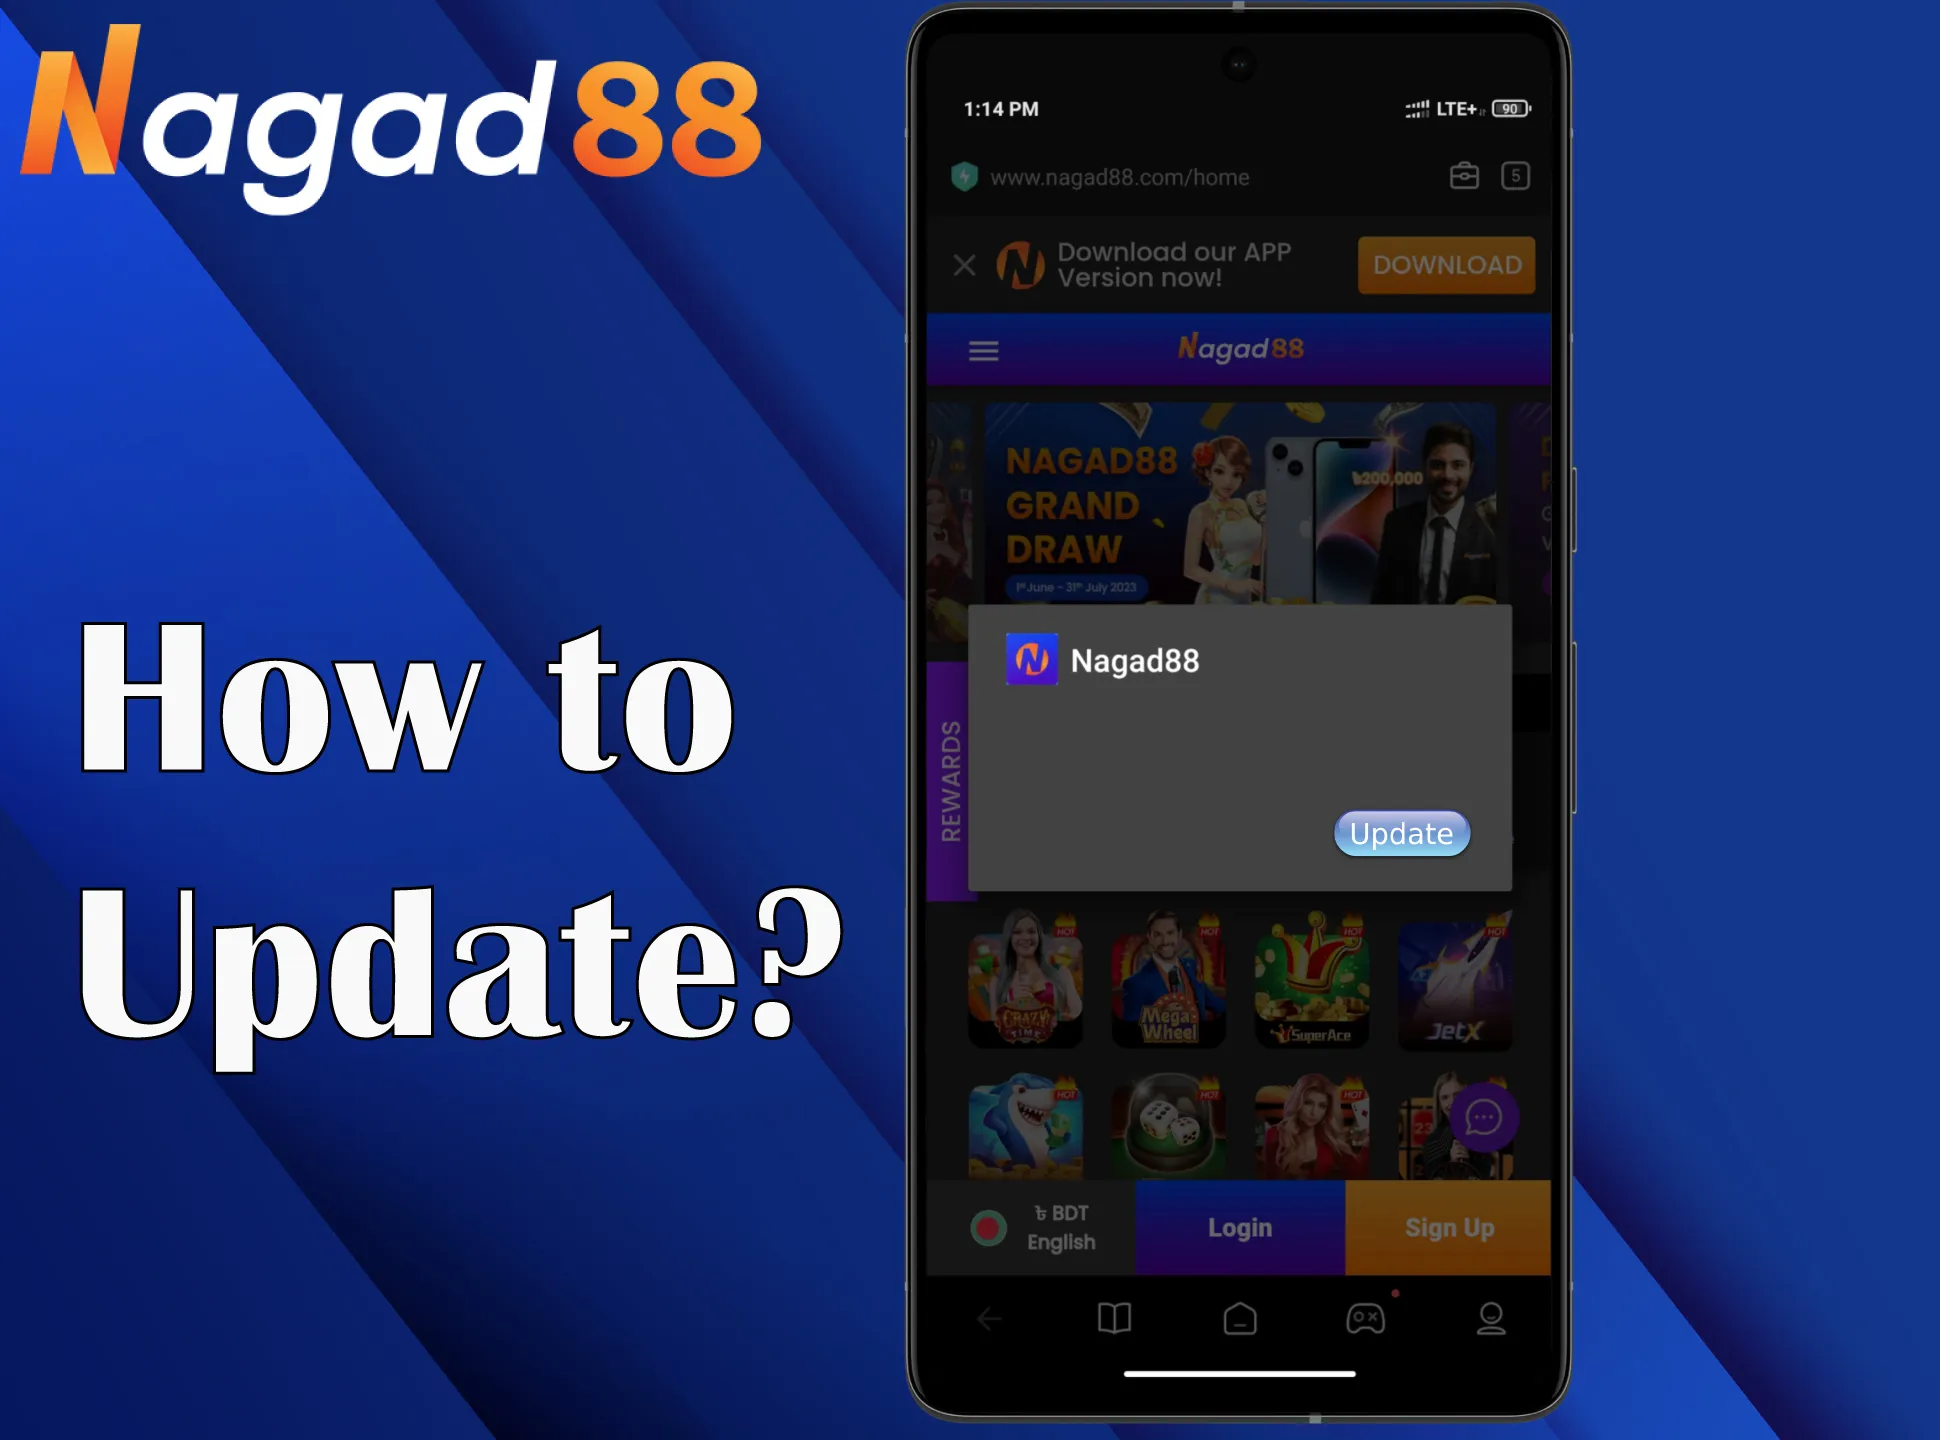 The Nagad88 mobile app is updated automatically